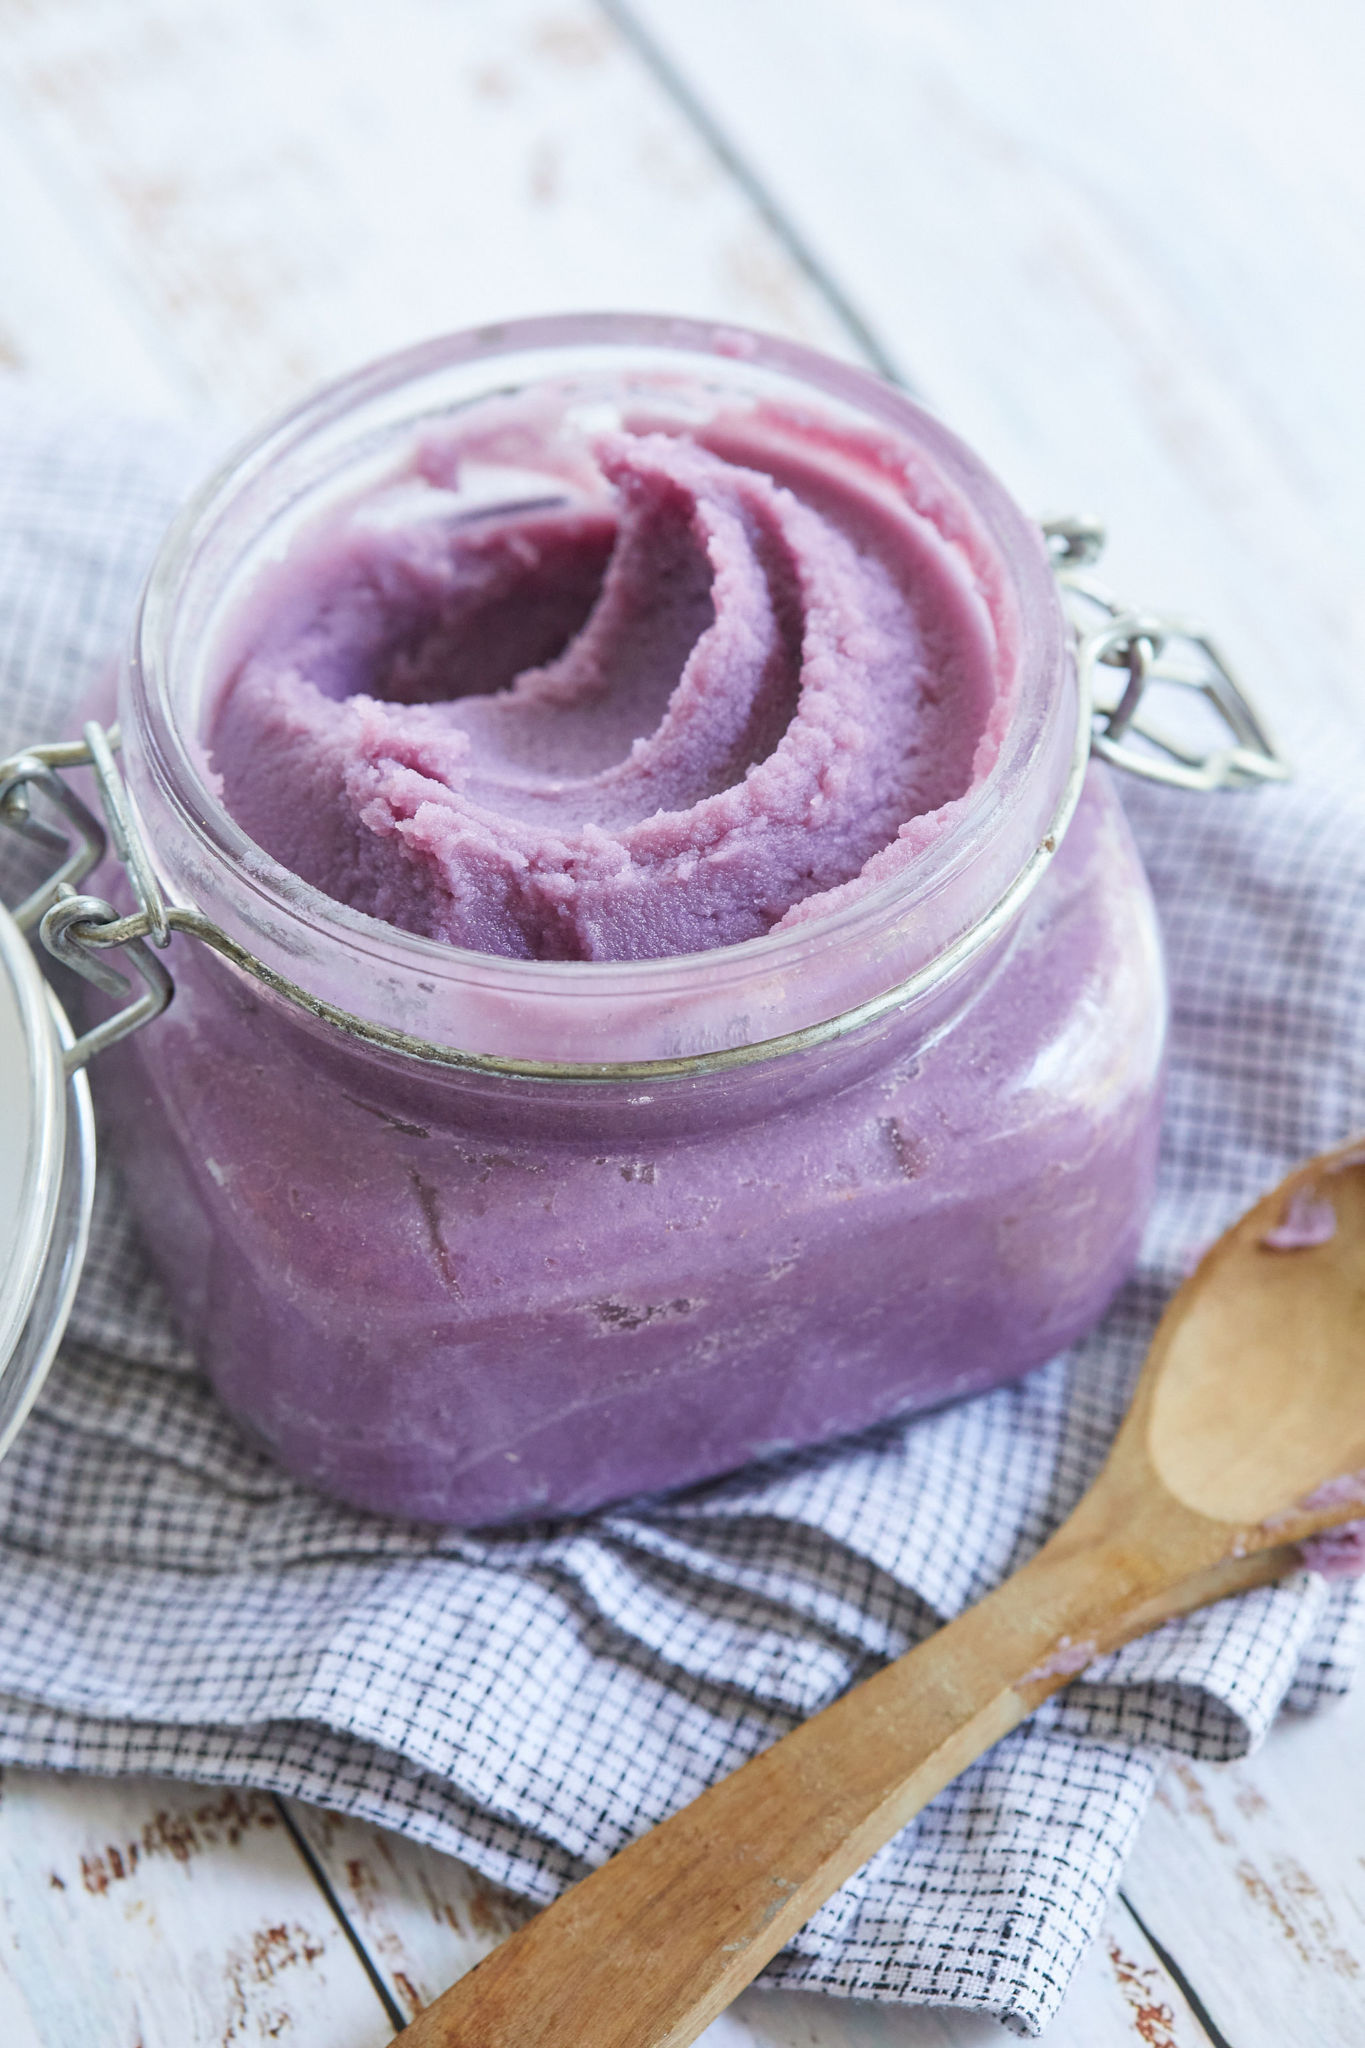 How To Make Ube Halaya Jam For All Your Ube Recipes